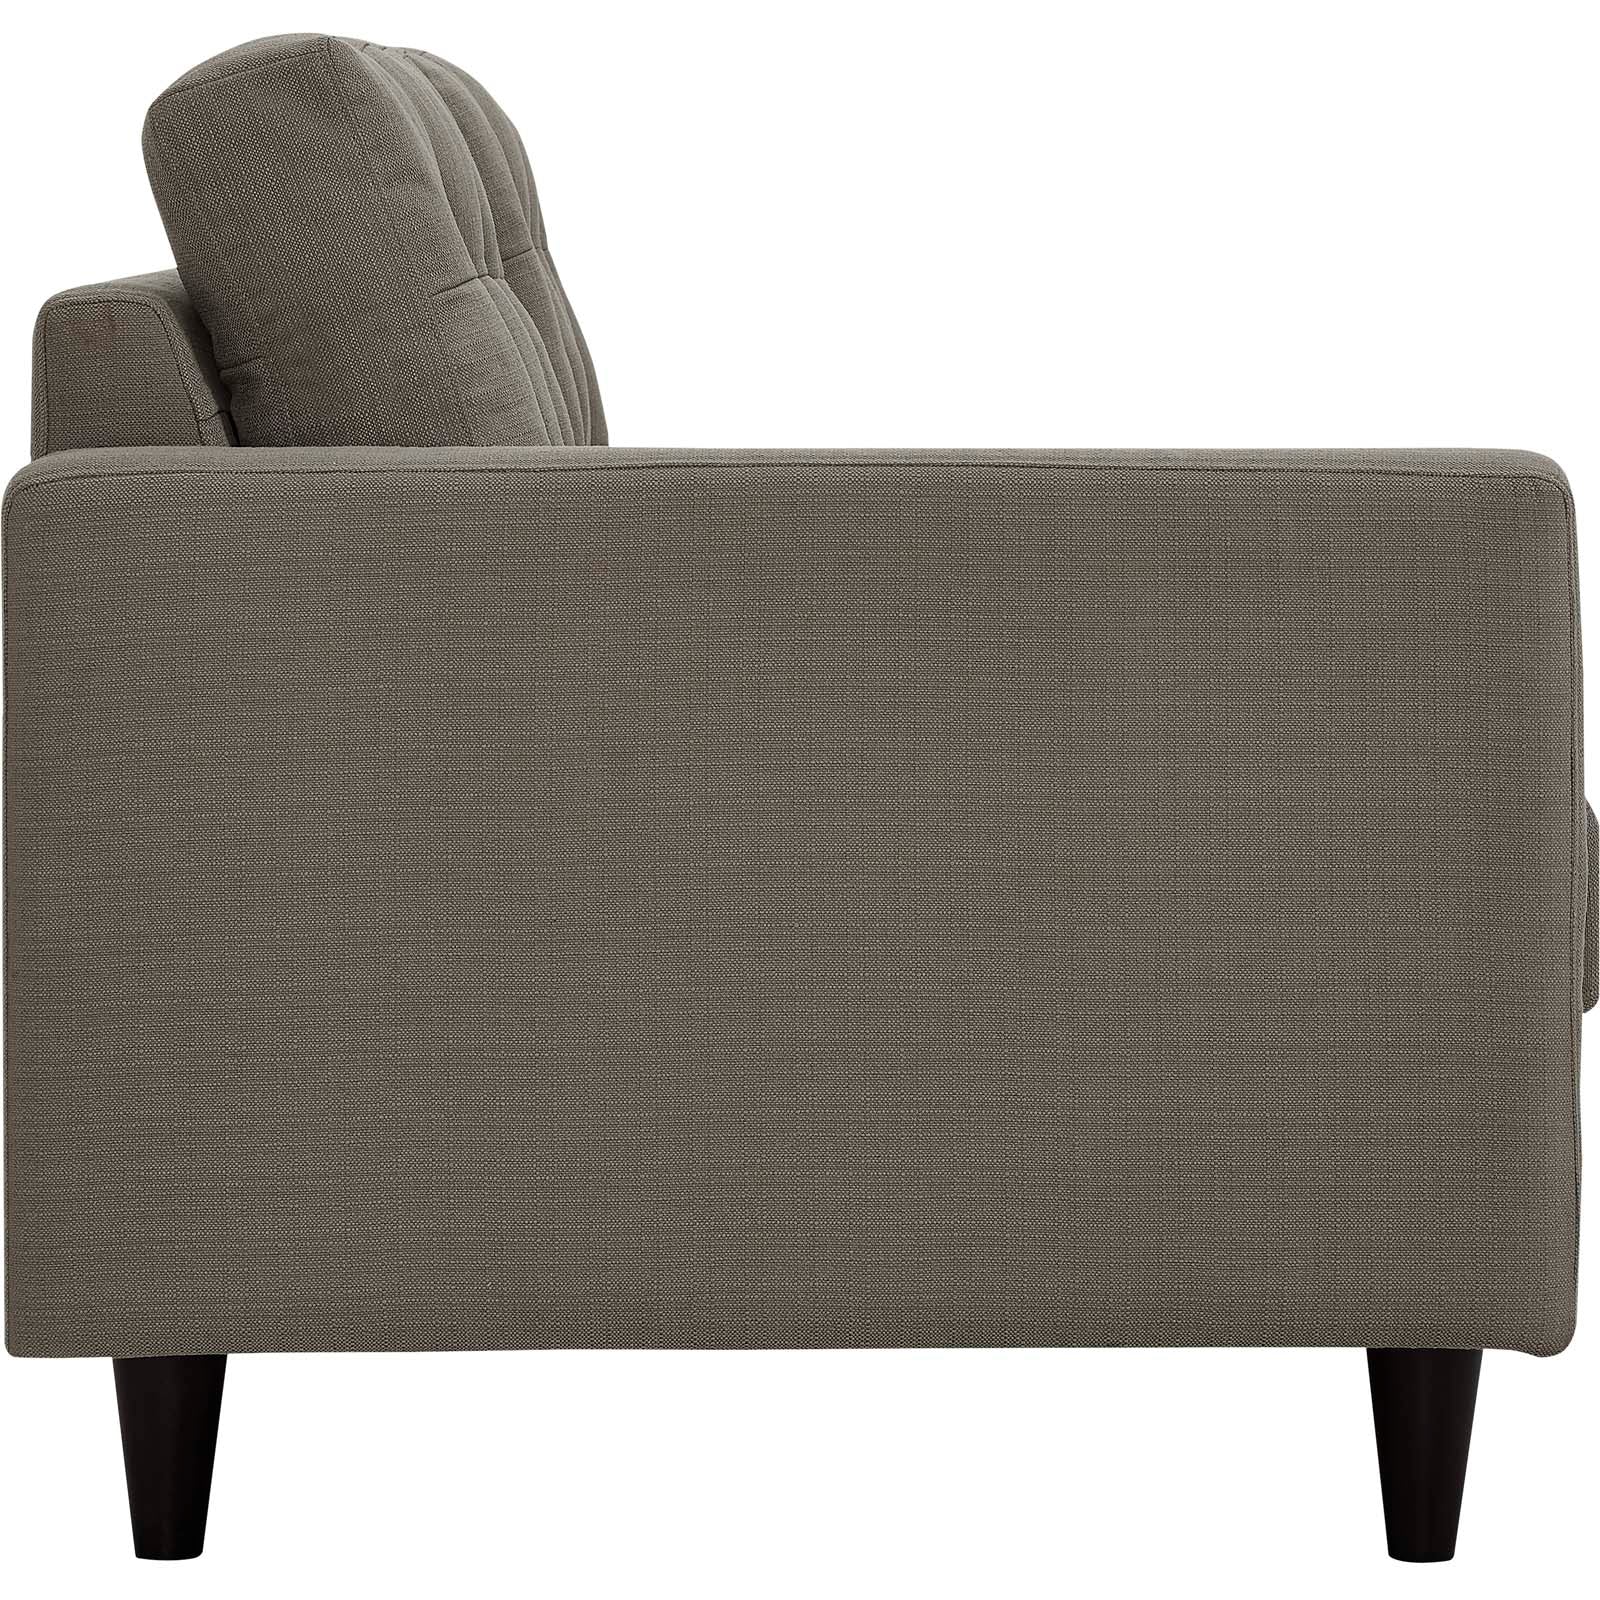 Empress 2 Piece Upholstered Fabric Right Facing Bumper Sectional - East Shore Modern Home Furnishings